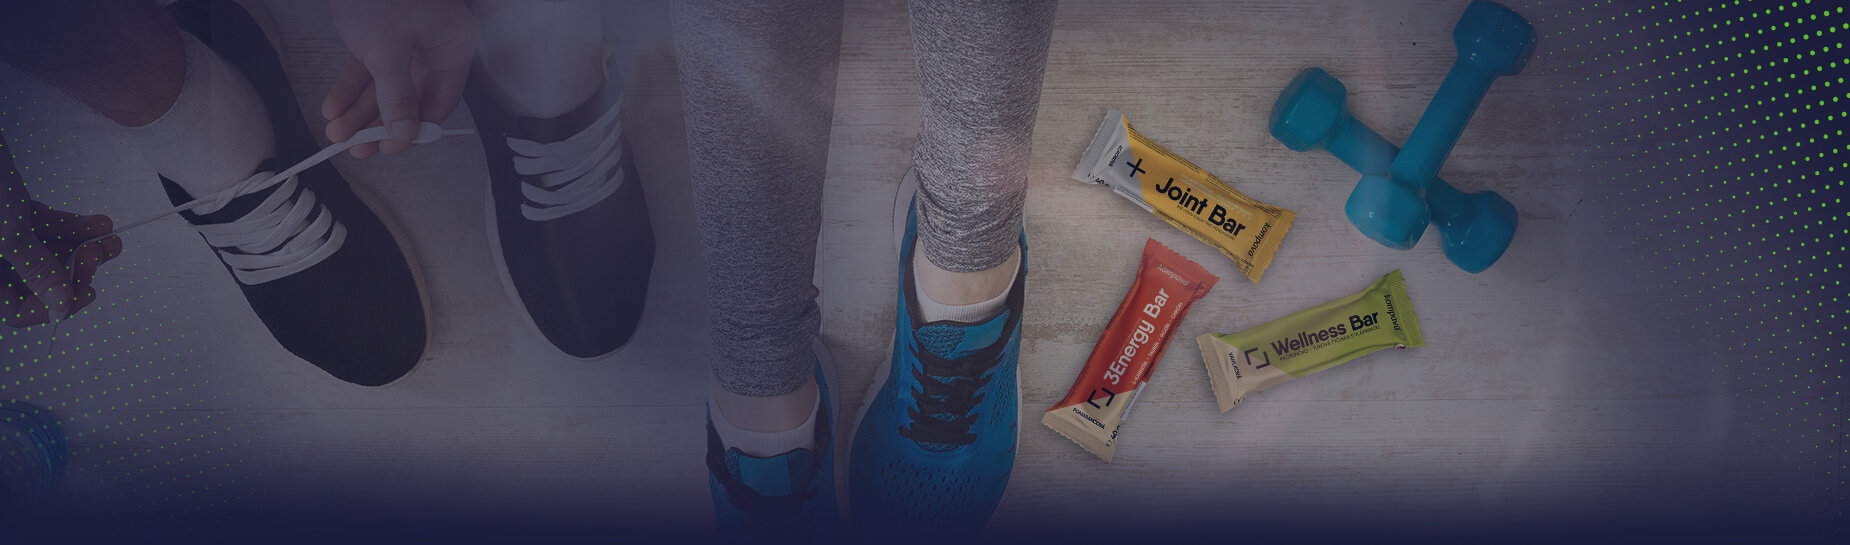 Protein, Energy and Joint Bars